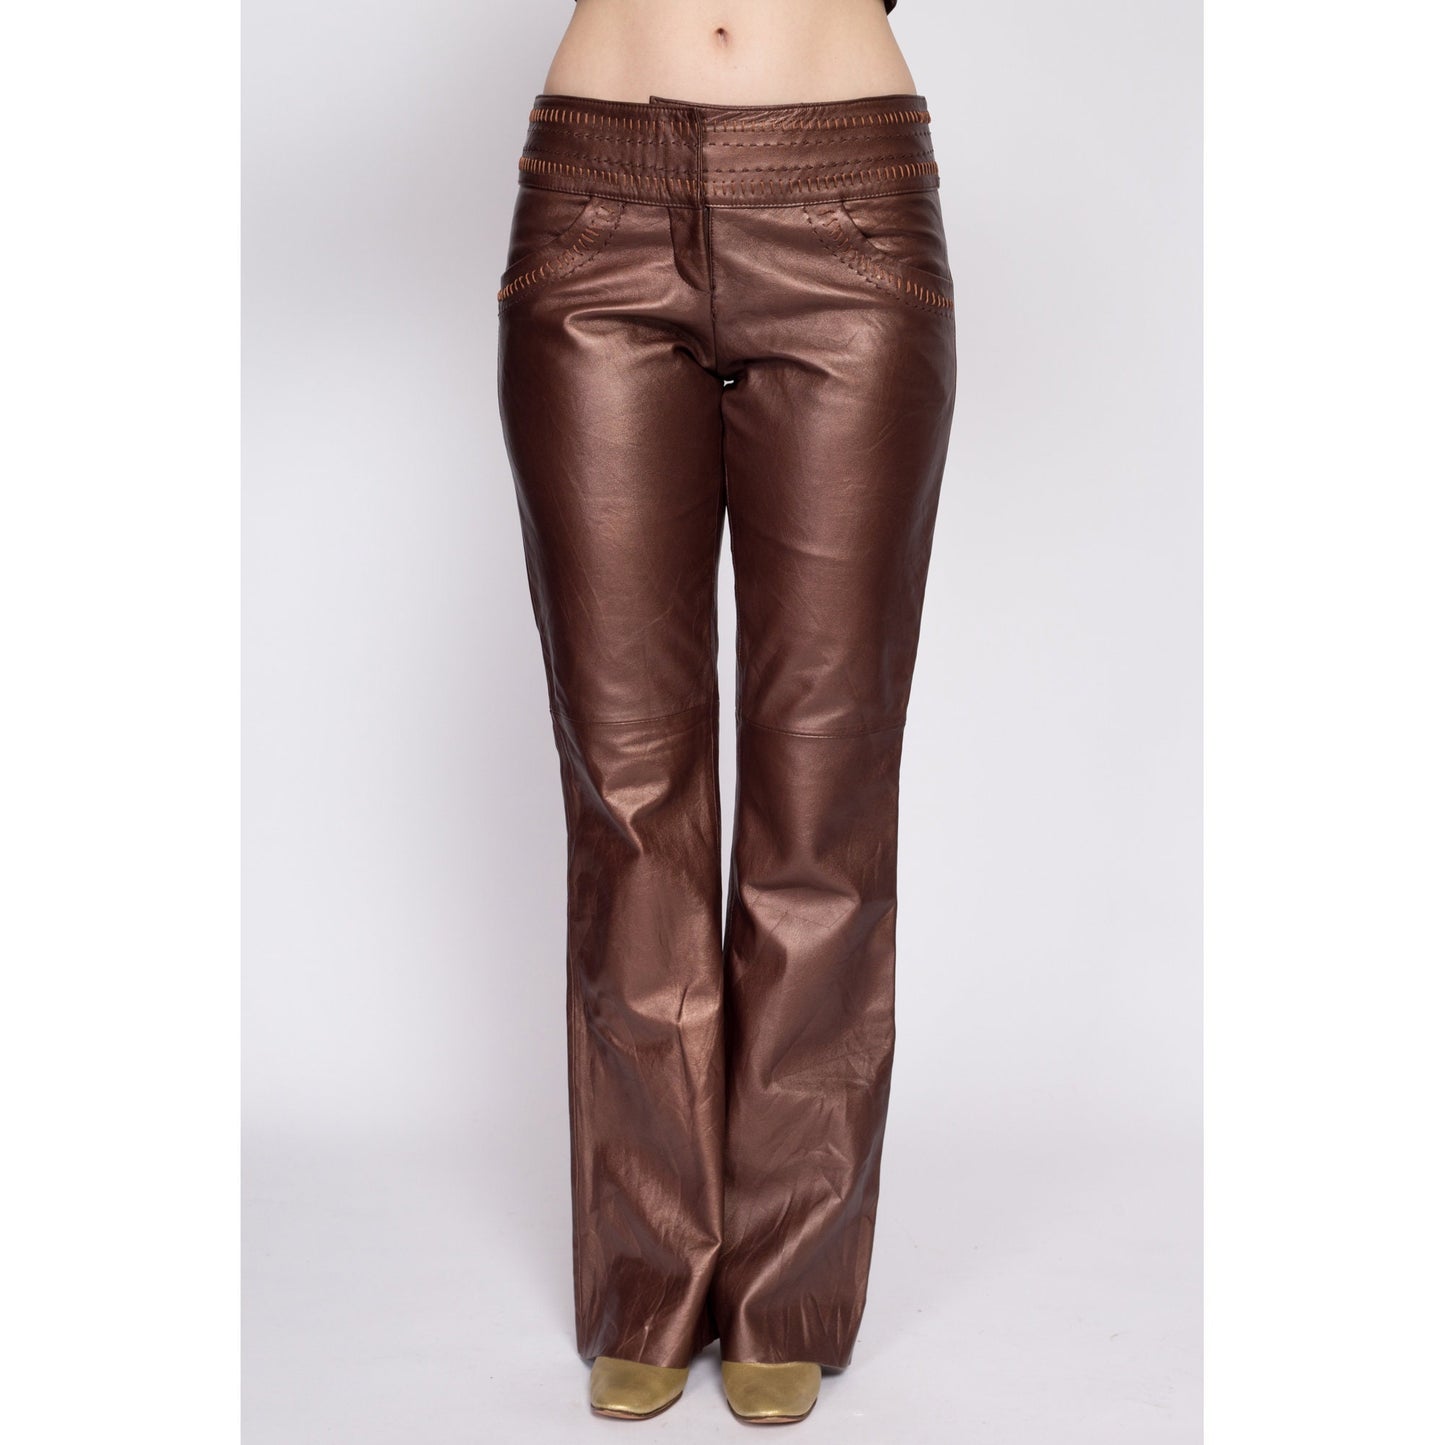 90s Leather Low Rise Pants SaRAY  Low rise pants, Womens dress tops, Leather  pants outfit